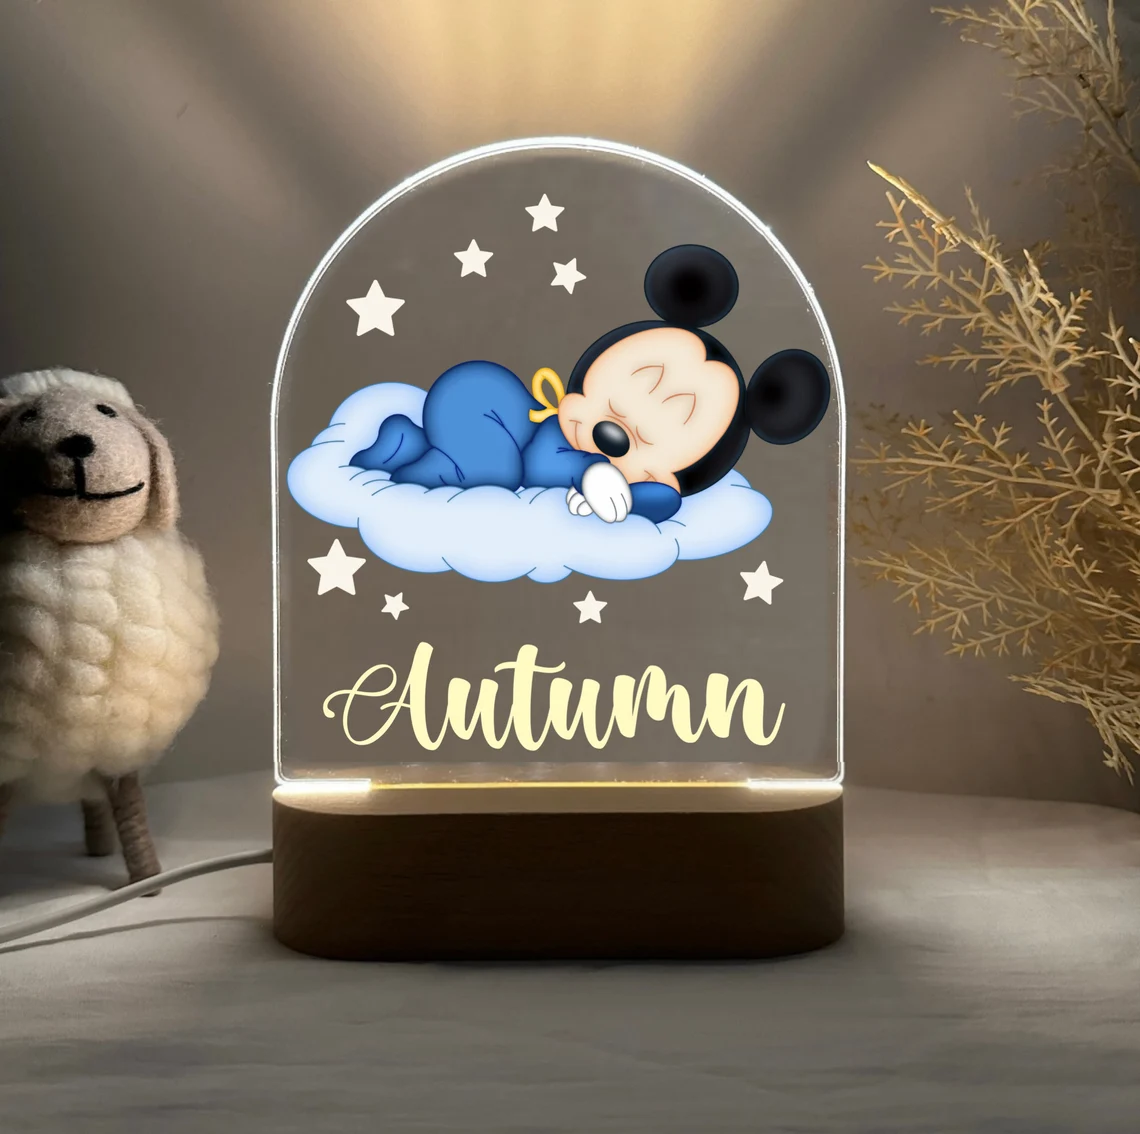 Personalised Mickey Mouse Night Light Great Gift For Kids Birthdays Nursery Decor